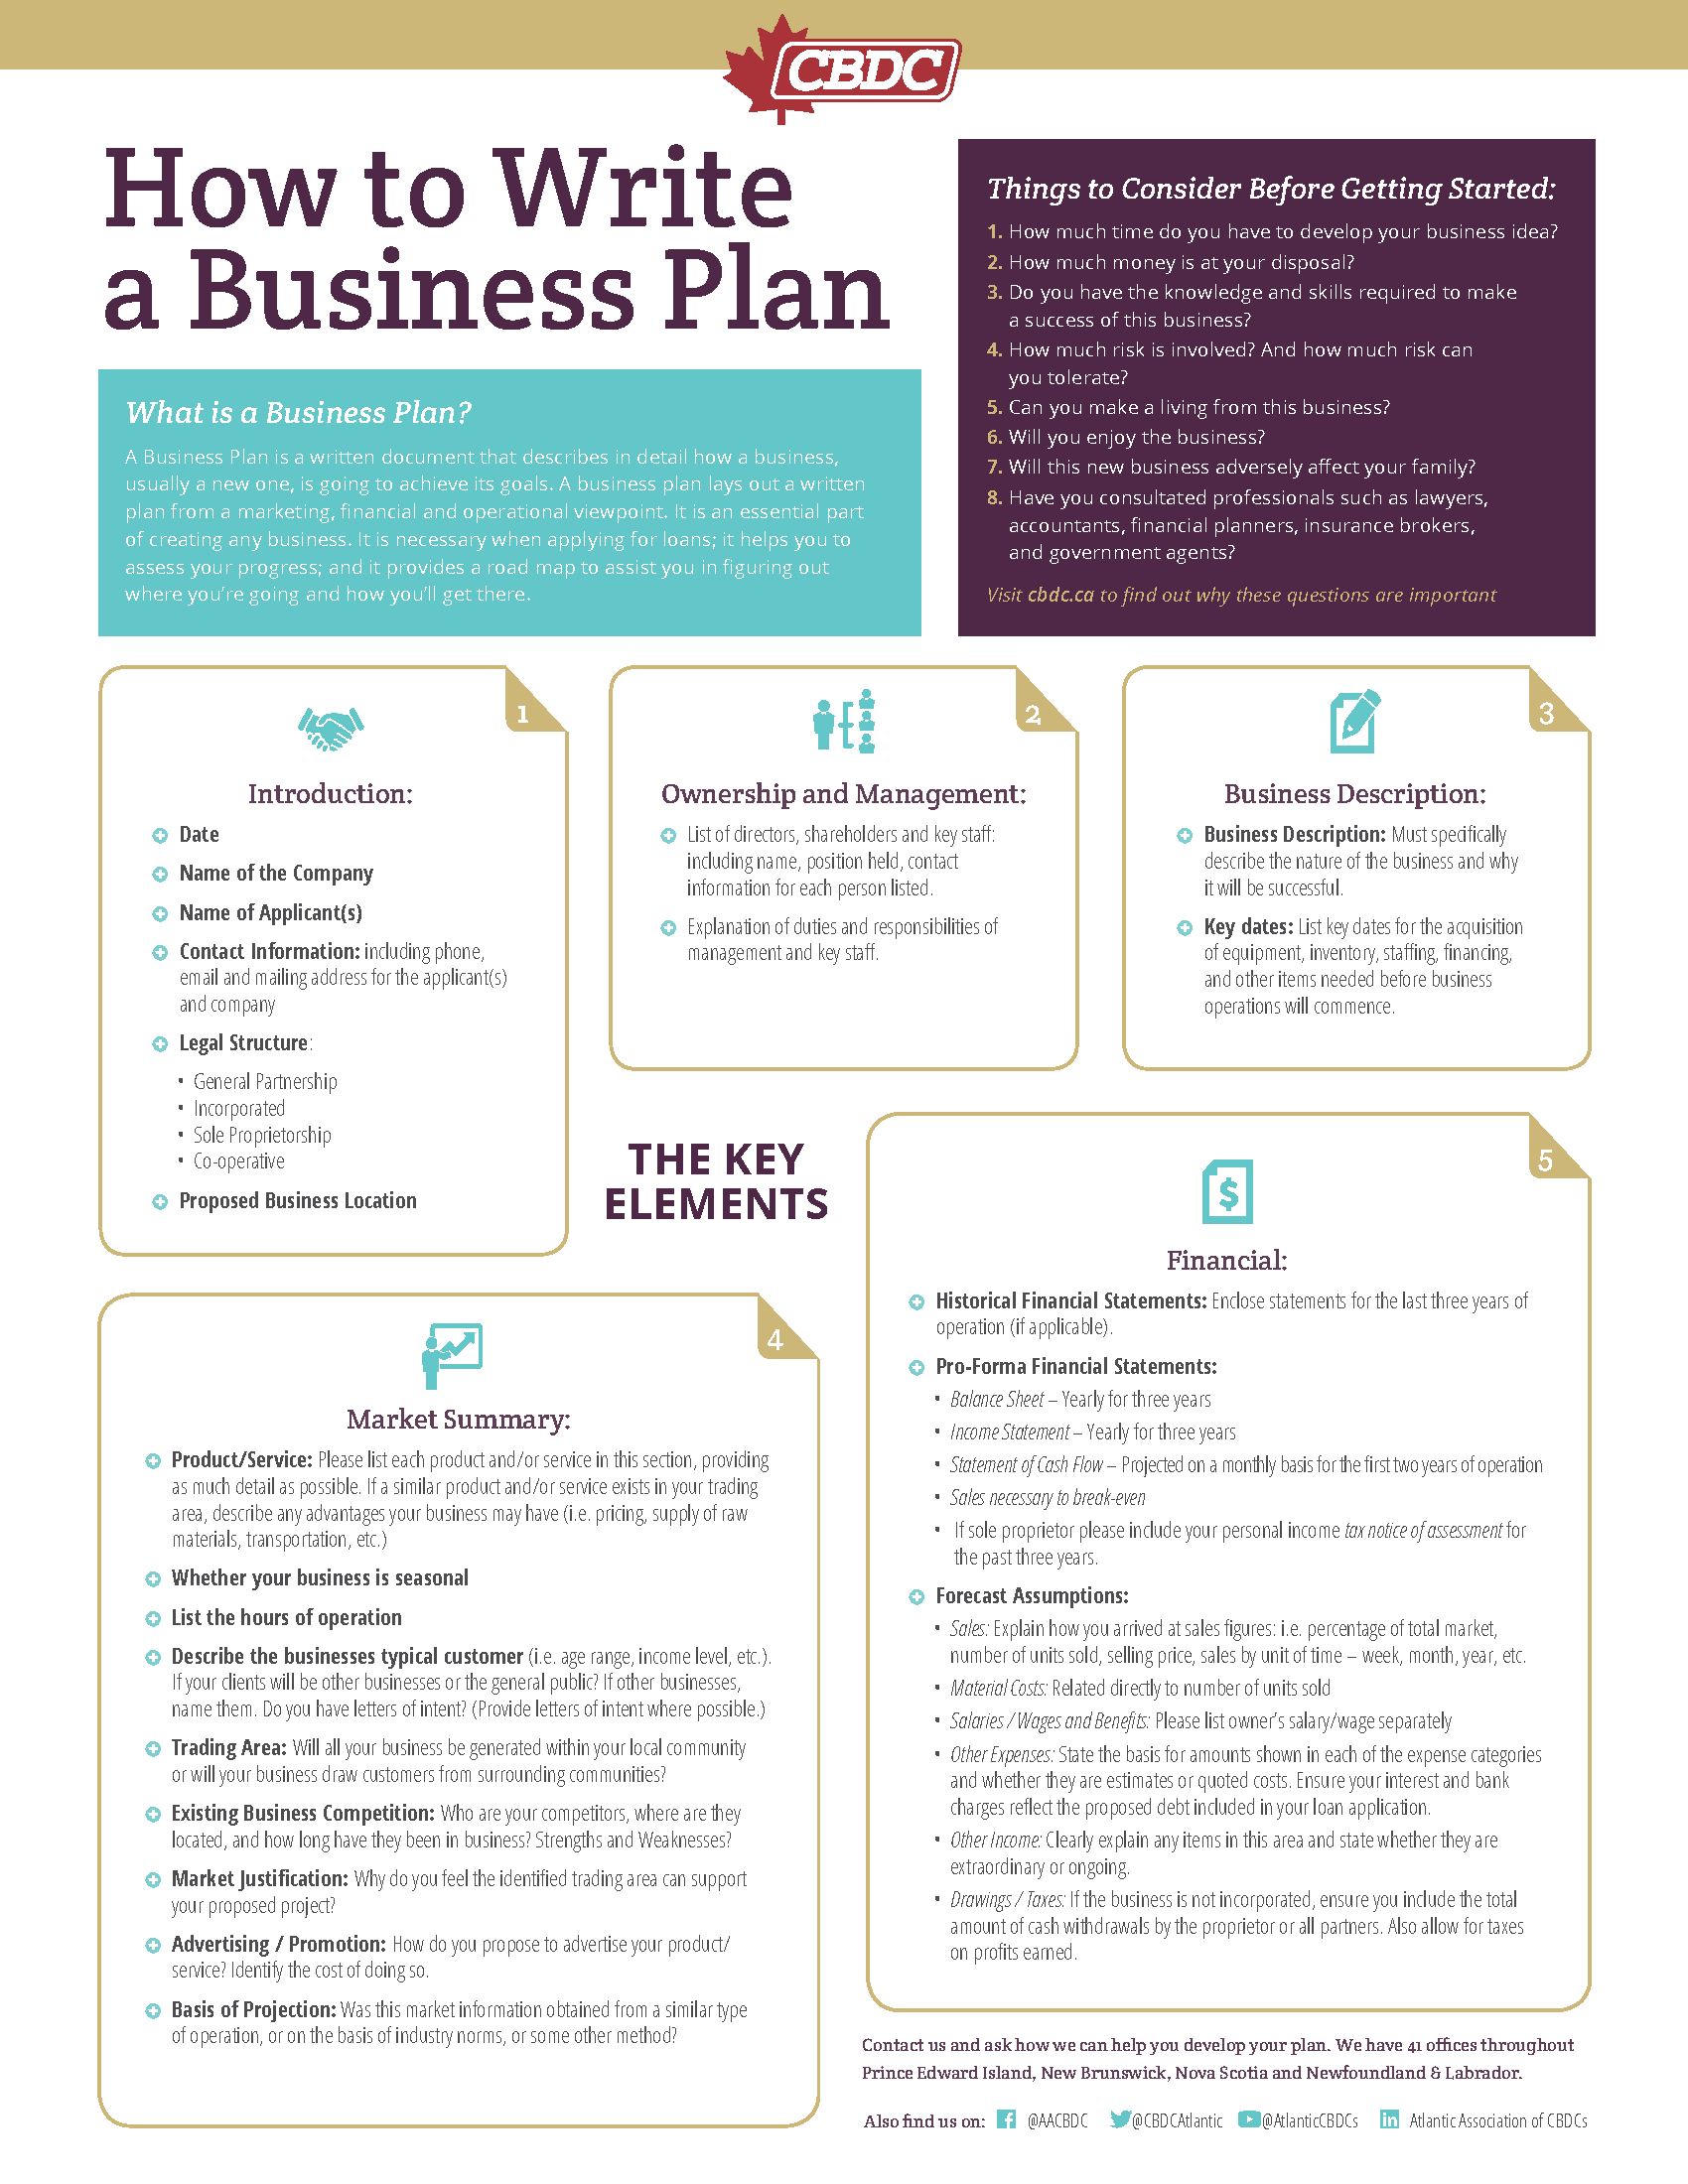 Companies that help you write a business plan